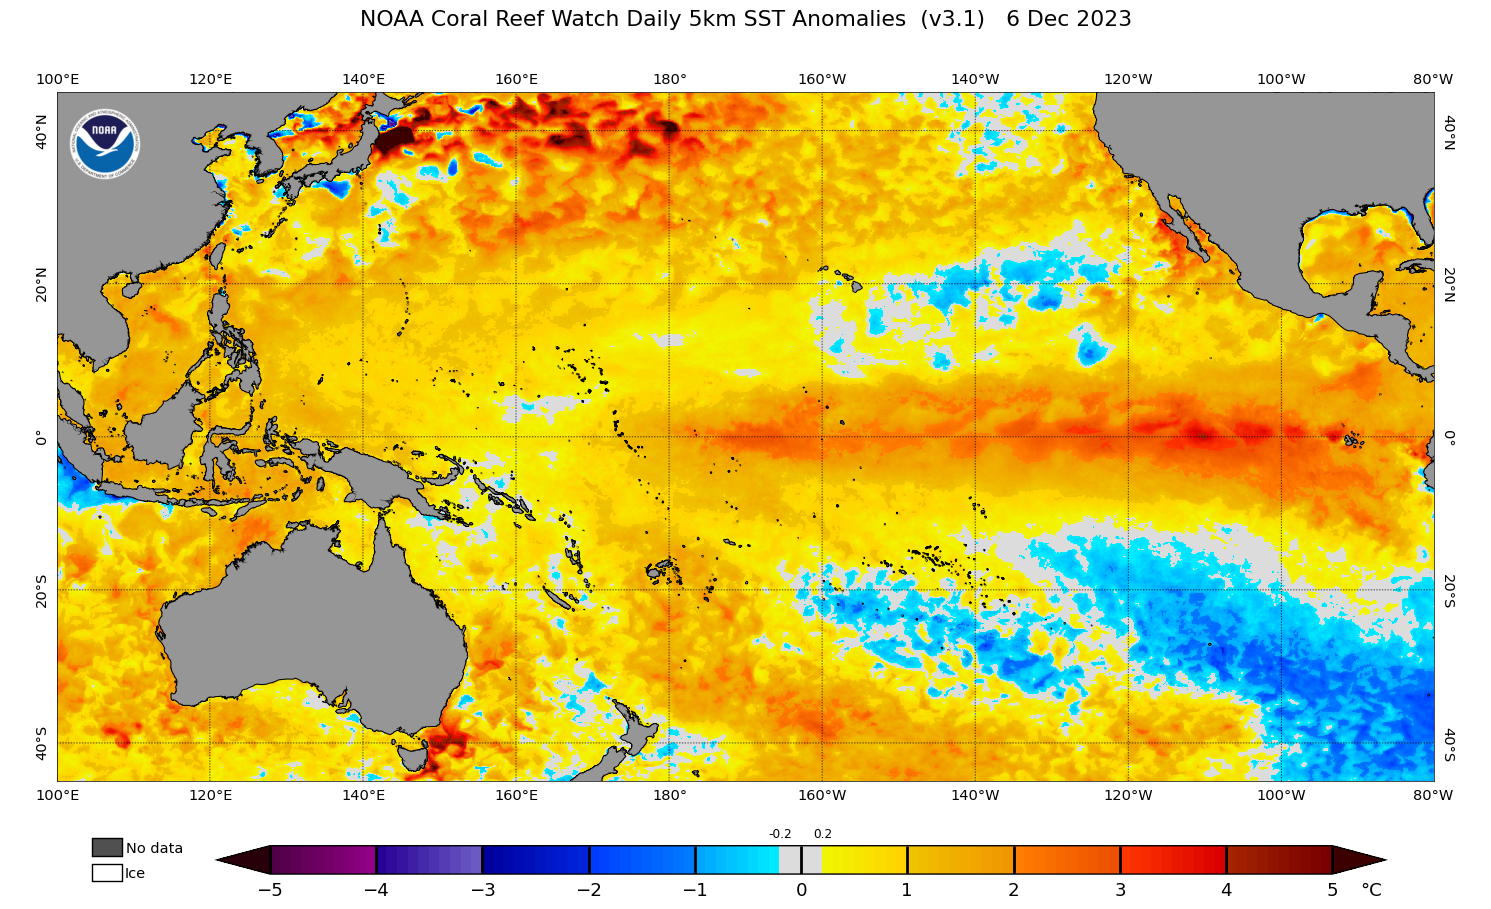 2023 Dec 06 SST Anomaly map for the Pacific Ocean